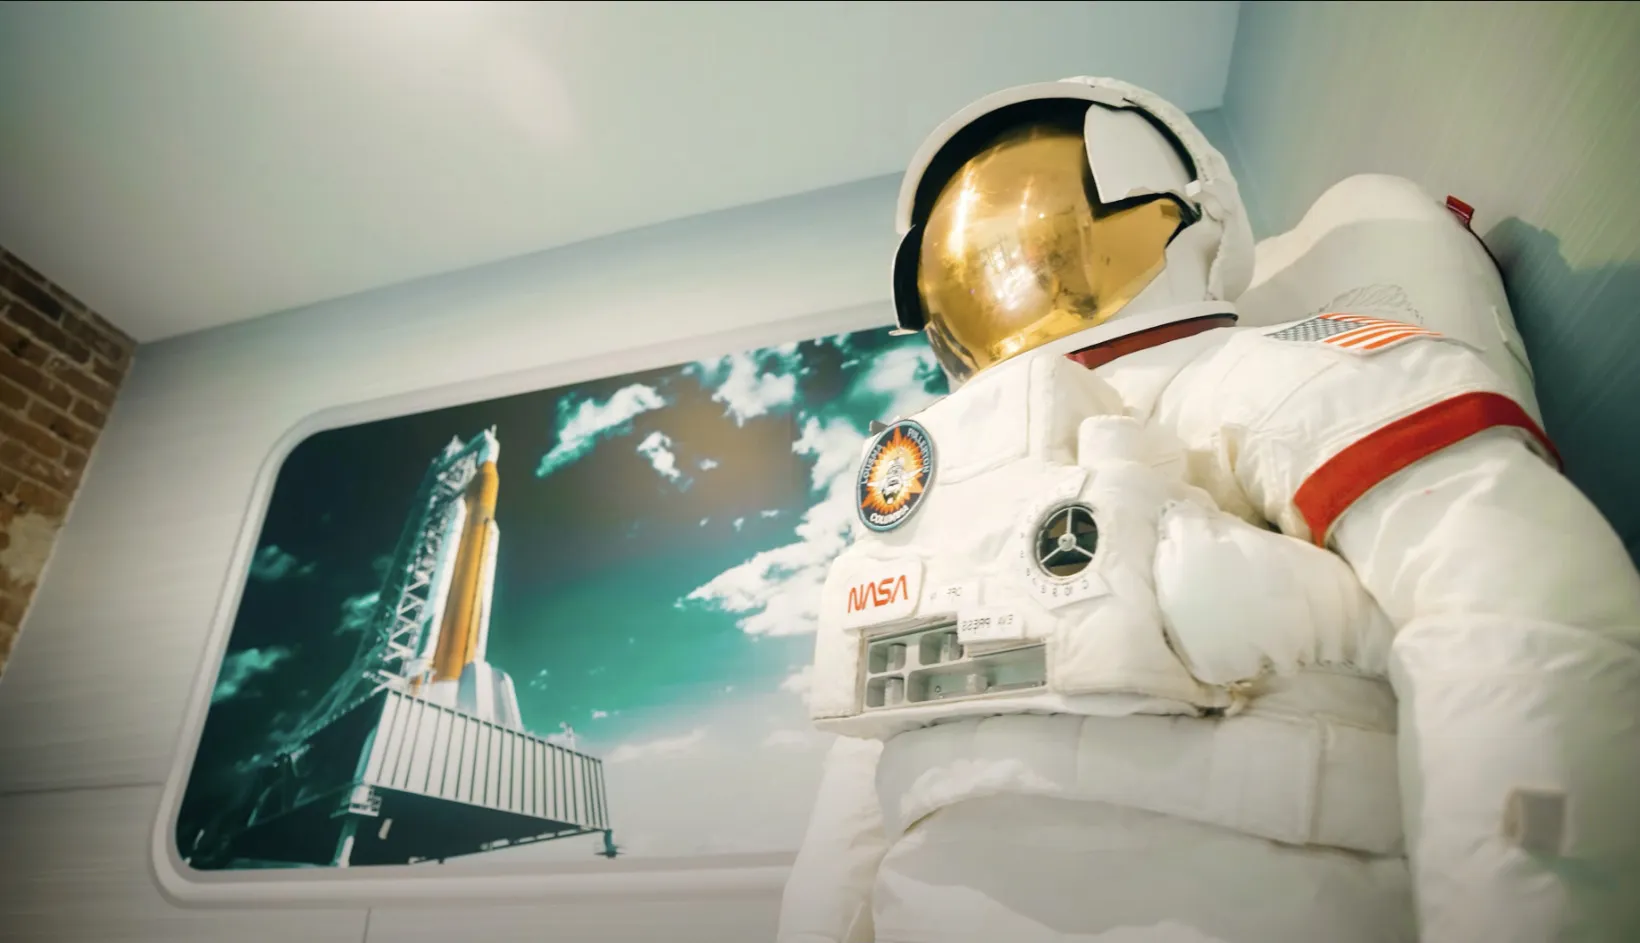 a space suit is displayed in a room